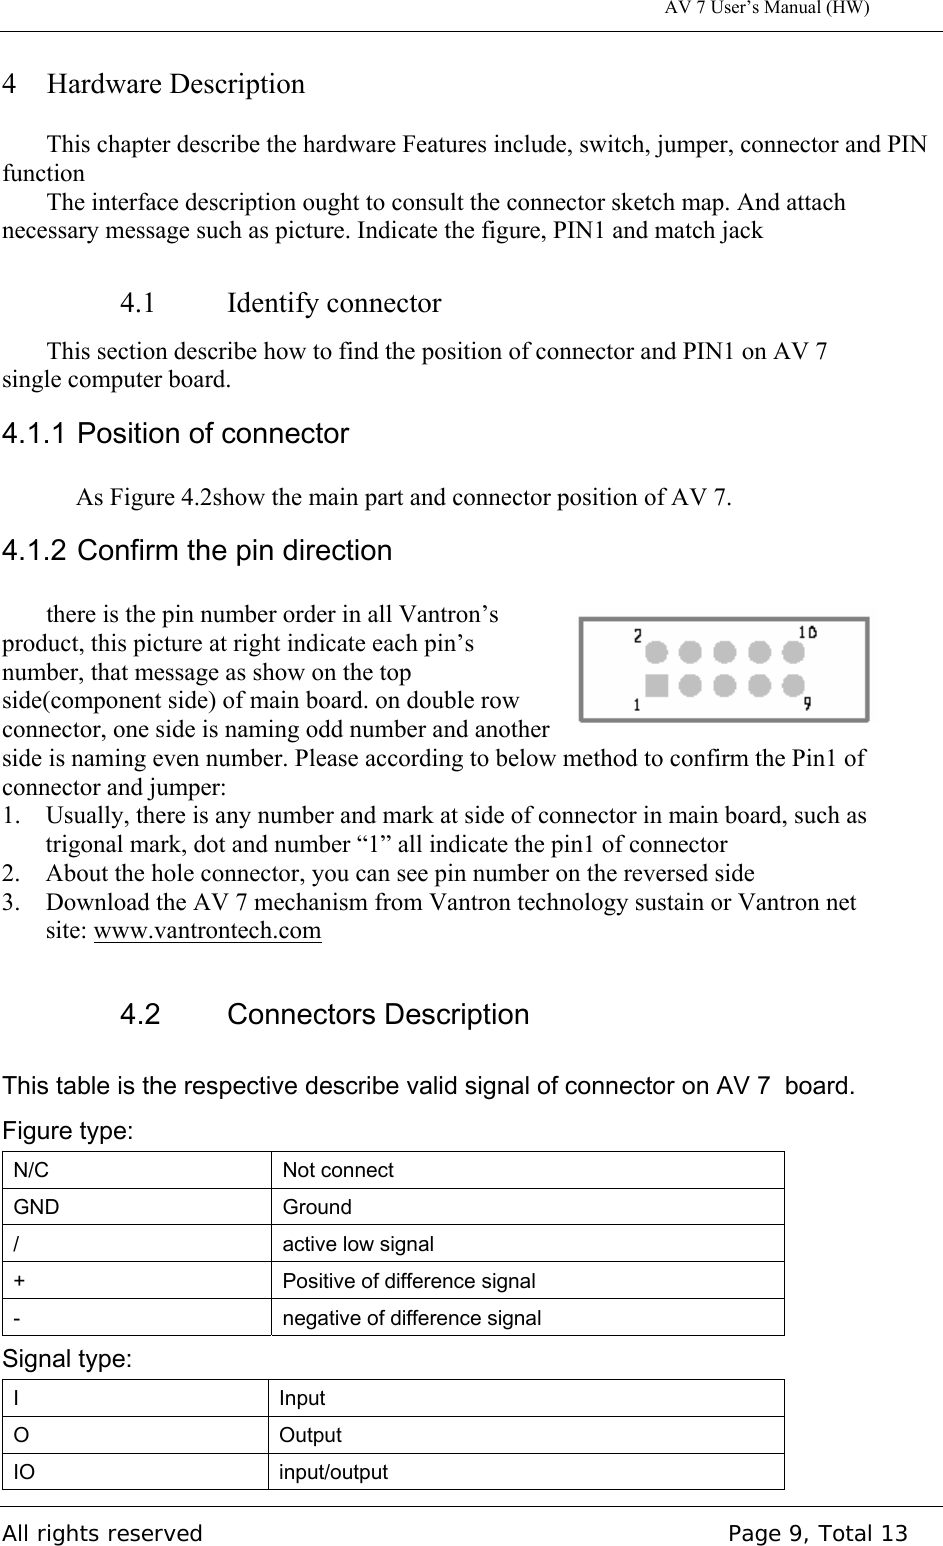 All rights reserved    Page 9, Total 13 4 Hardware Description This chapter describe the hardware Features include, switch, jumper, connector and PIN function The interface description ought to consult the connector sketch map. And attach necessary message such as picture. Indicate the figure, PIN1 and match jack   4.1 Identify connector This section describe how to find the position of connector and PIN1 on AV 7 single computer board. 4.1.1 Position of connector As Figure 4.2show the main part and connector position of AV 7.4.1.2 Confirm the pin direction there is the pin number order in all Vantron’s   product, this picture at right indicate each pin’s number, that message as show on the top side(component side) of main board. on double row connector, one side is naming odd number and another side is naming even number. Please according to below method to confirm the Pin1 of connector and jumper: 1. Usually, there is any number and mark at side of connector in main board, such astrigonal mark, dot and number “1” all indicate the pin1 of connector 2. About the hole connector, you can see pin number on the reversed side3. Download the AV 7 mechanism from Vantron technology sustain or Vantron netsite: www.vantrontech.com4.2 Connectors Description This table is the respective describe valid signal of connector on AV 7  board. Figure type: N/C  Not connect GND  Ground /  active low signal +  Positive of difference signal -  negative of difference signal Signal type: I  Input O  Output IO  input/output AV 7 User’s Manual (HW) 